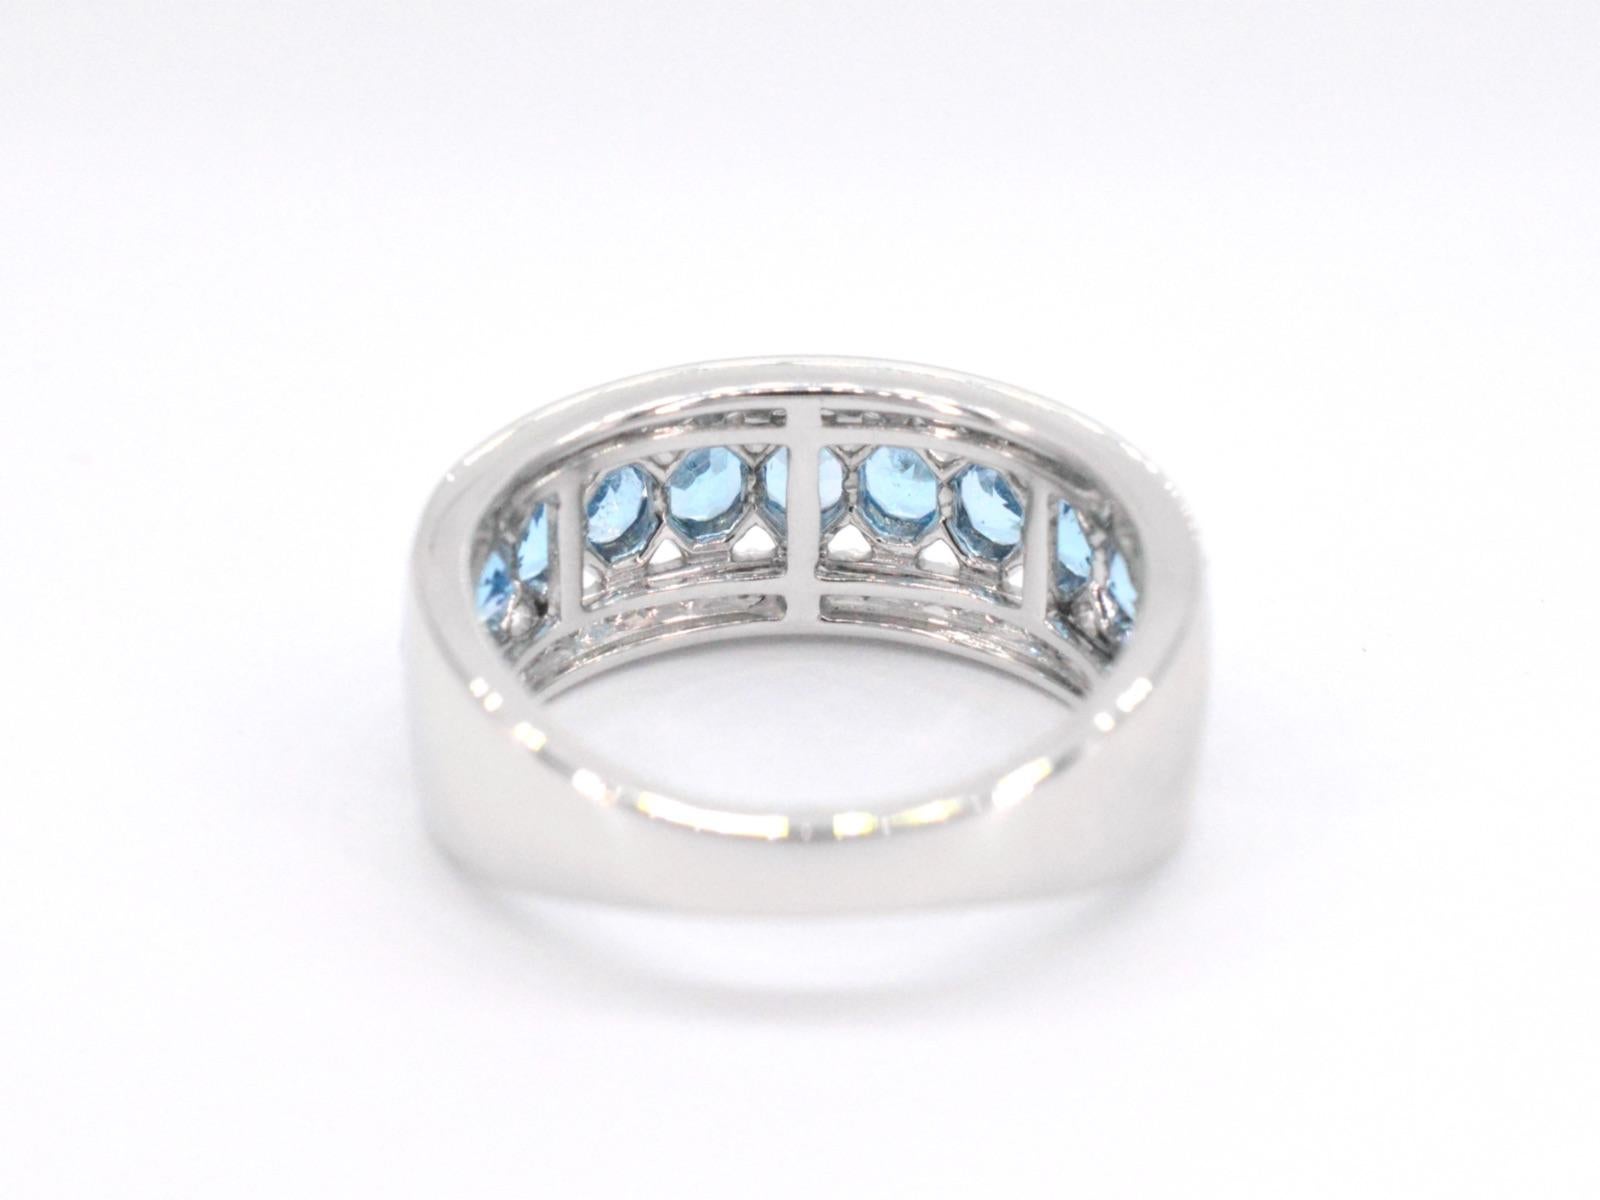 Women's White gold pave ring with diamonds and topaz